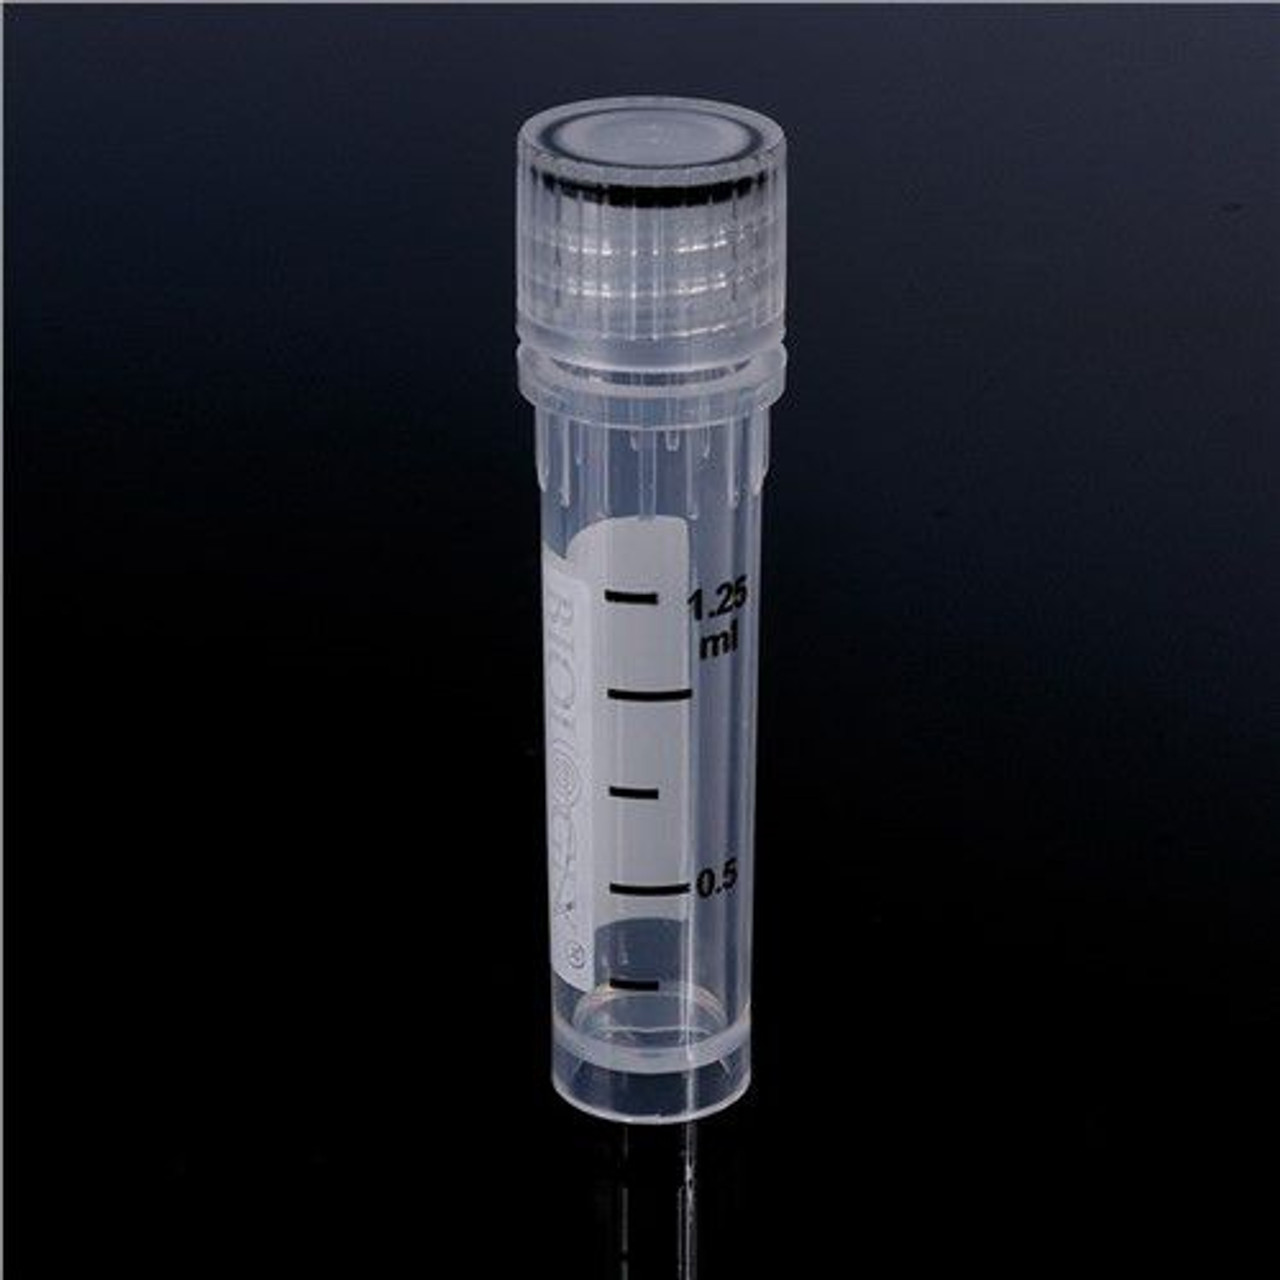 BIOLOGIX 2.0ml CRYOVIALS, STERILE, SELF-STANDING, EXTERNAL THREAD AND CLEAR O-RING SCREW CAPS, ASSEMBLED, 500/CASE